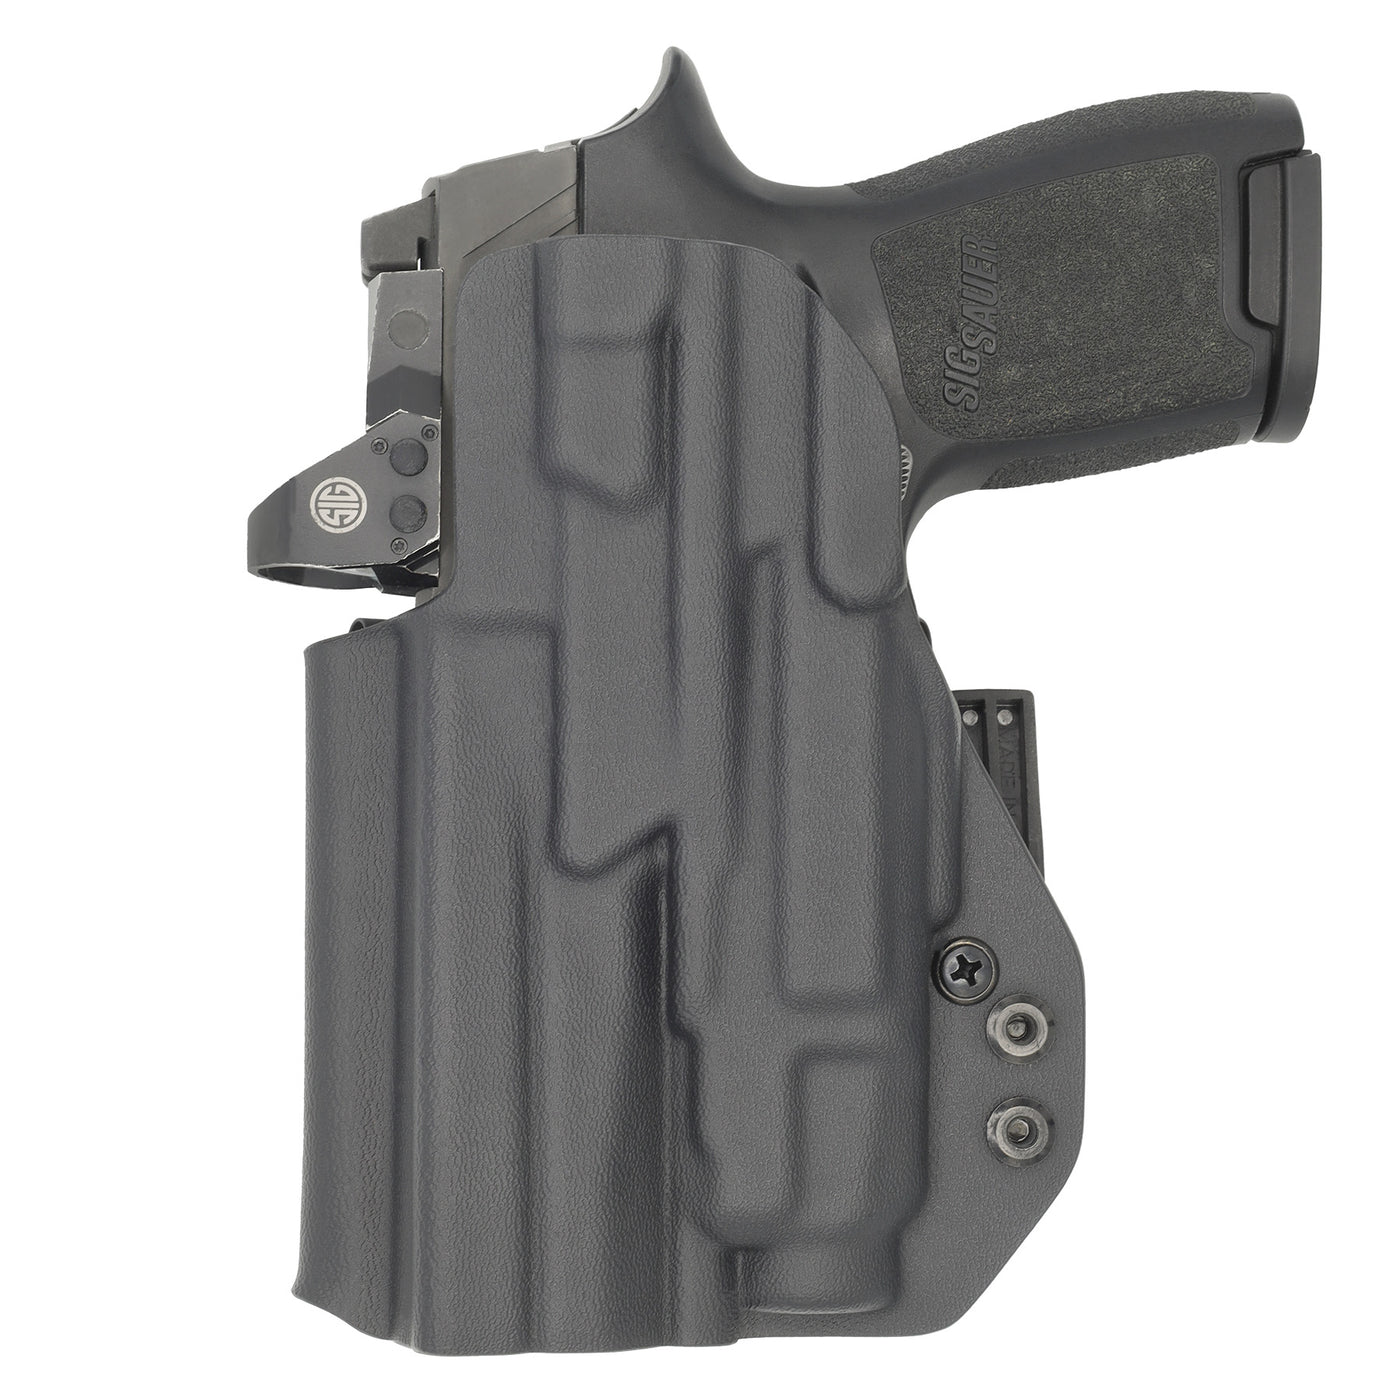 C&G Holsters quickship IWB ALPHA UPGRADE Tactical Masada Streamlight TLR7/a in holstered position back view